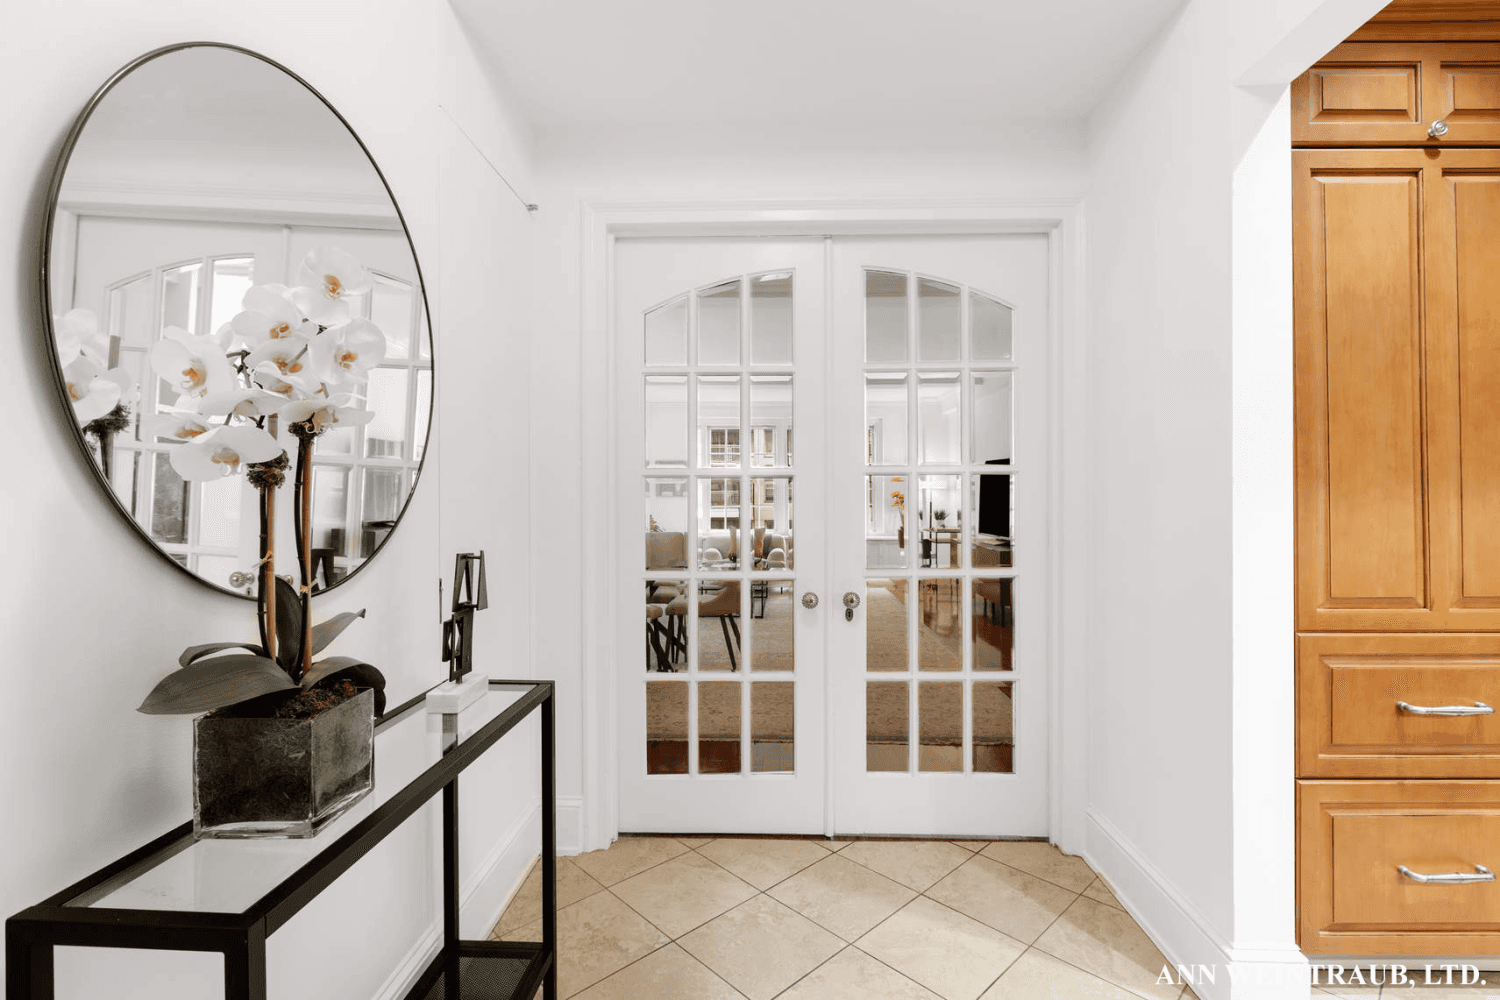 Price negotiable. Open the custom designed, glass paneled, double French doors and you will enter the largest 1 bedroom line of apartments housed within the iconic One Fifth Avenue building ...